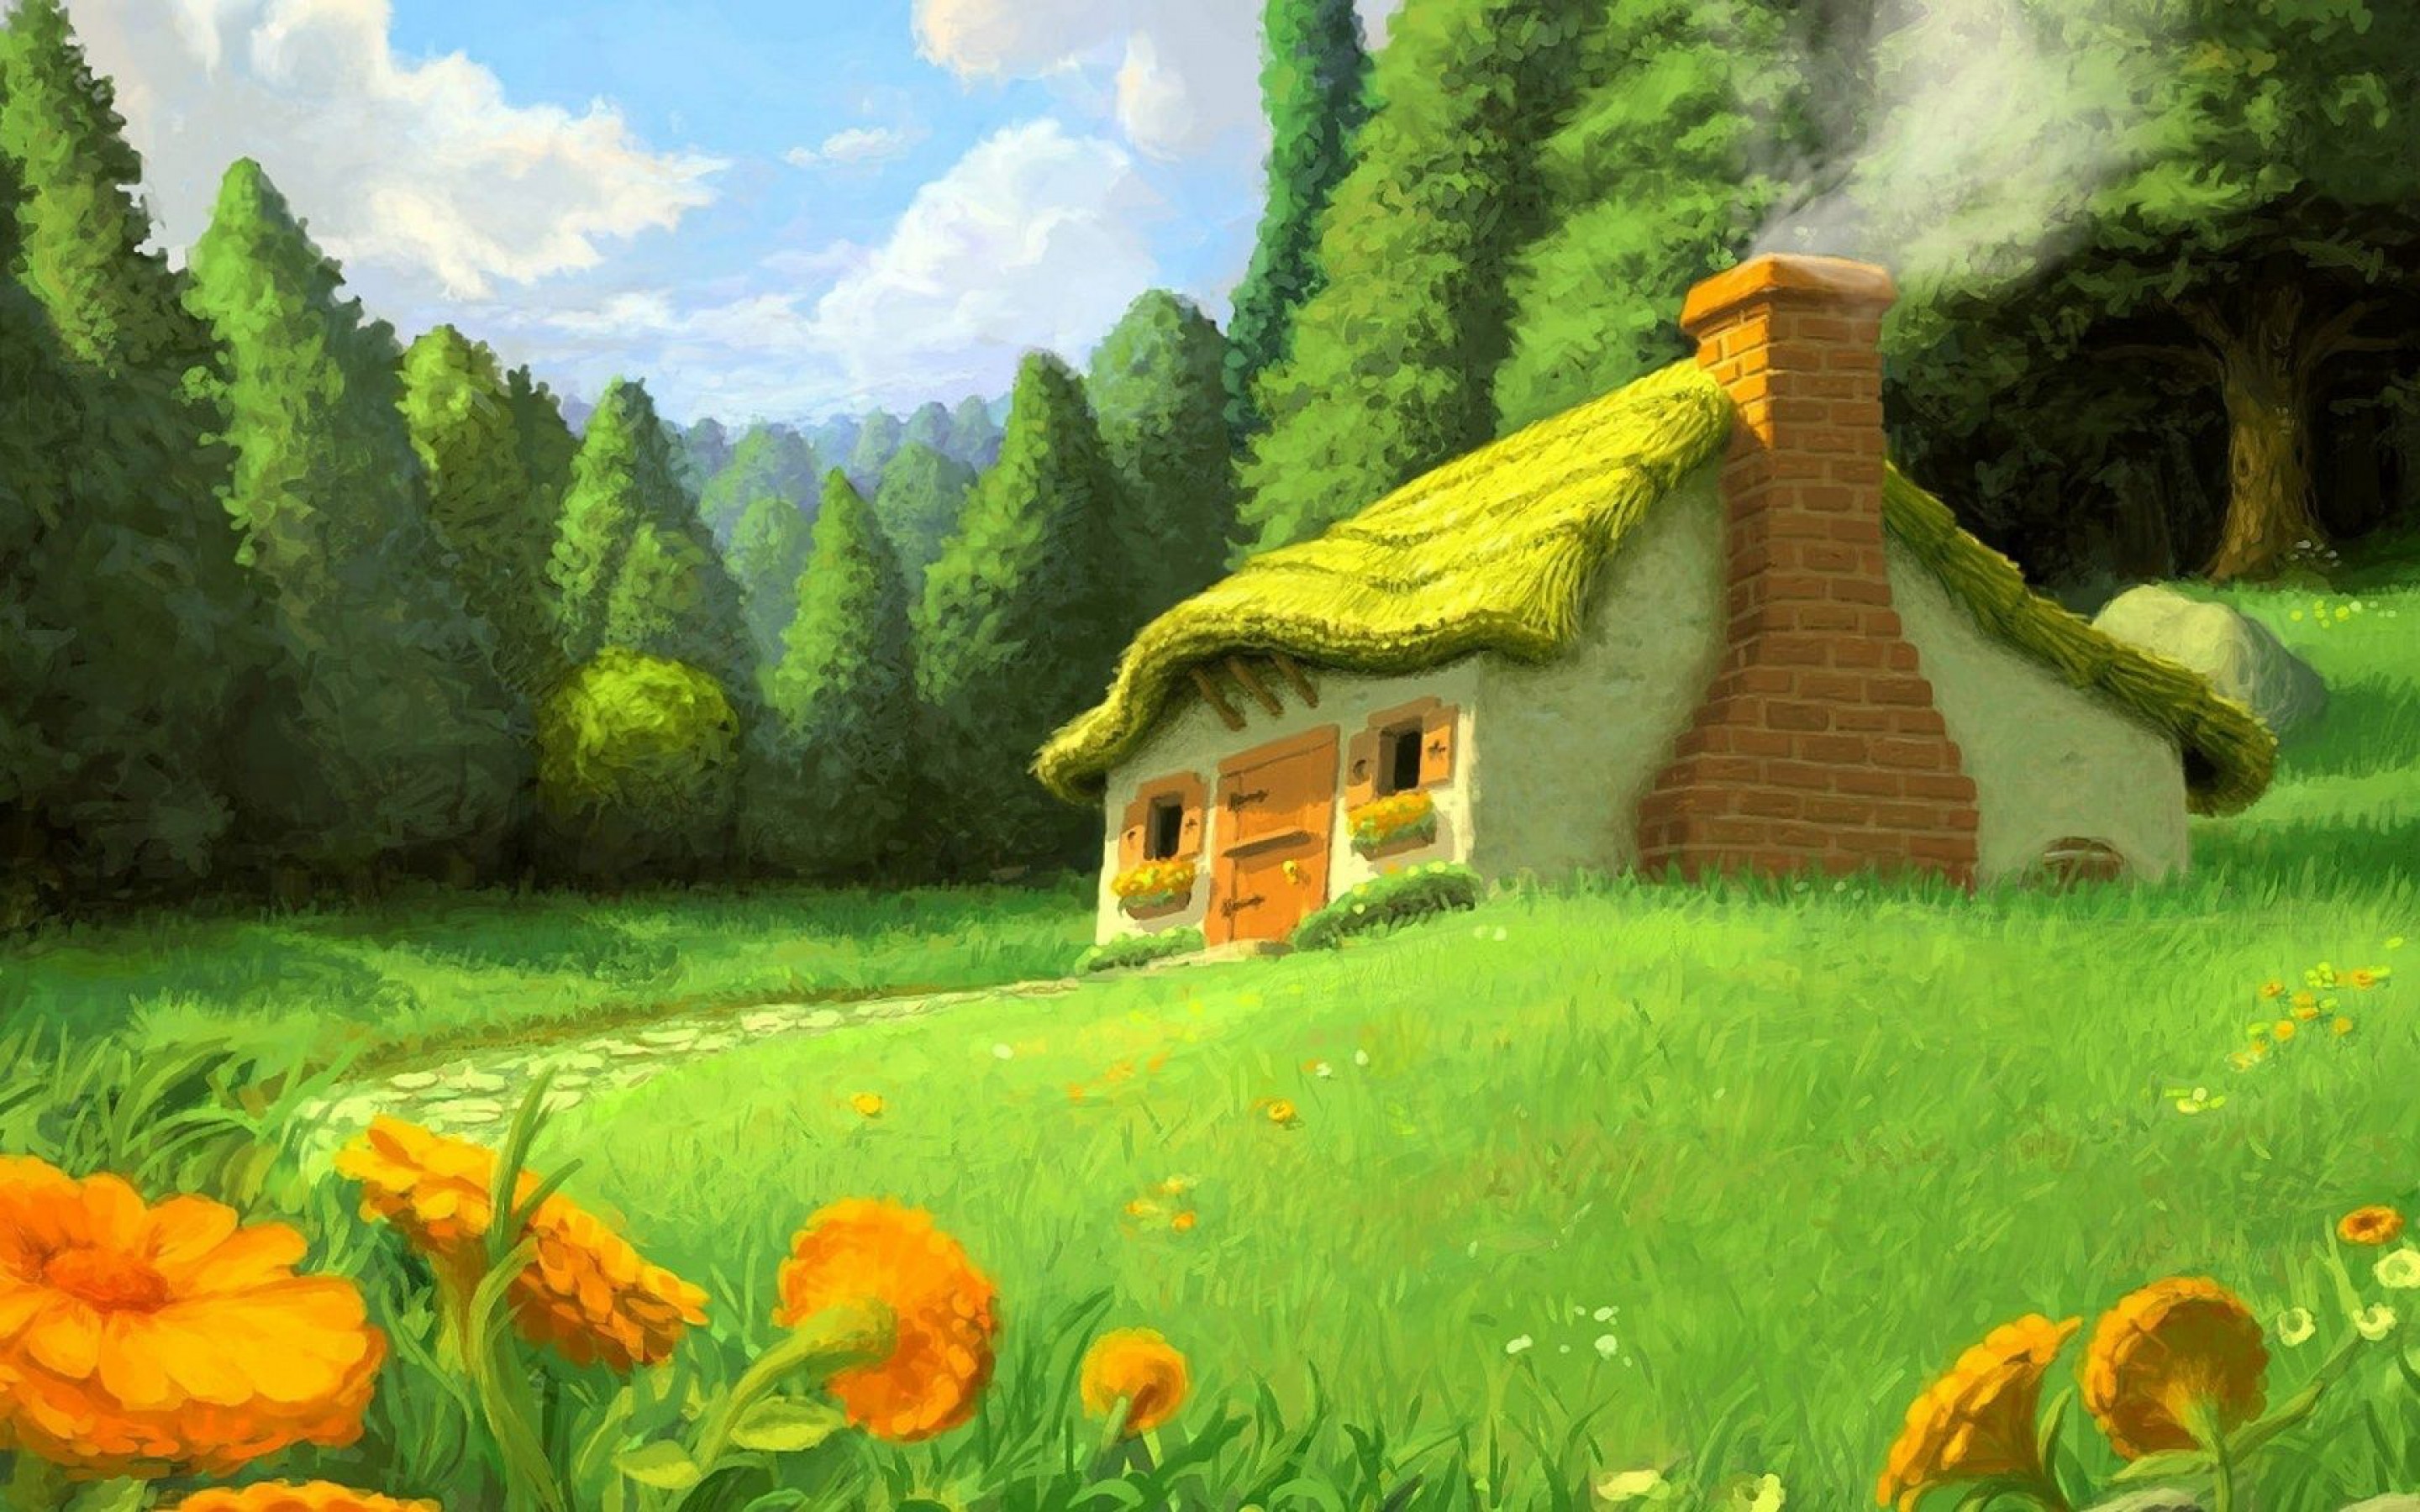 General 2880x1800 artwork nature house cottage forest flowers digital art grass trees plants smoke sky clouds